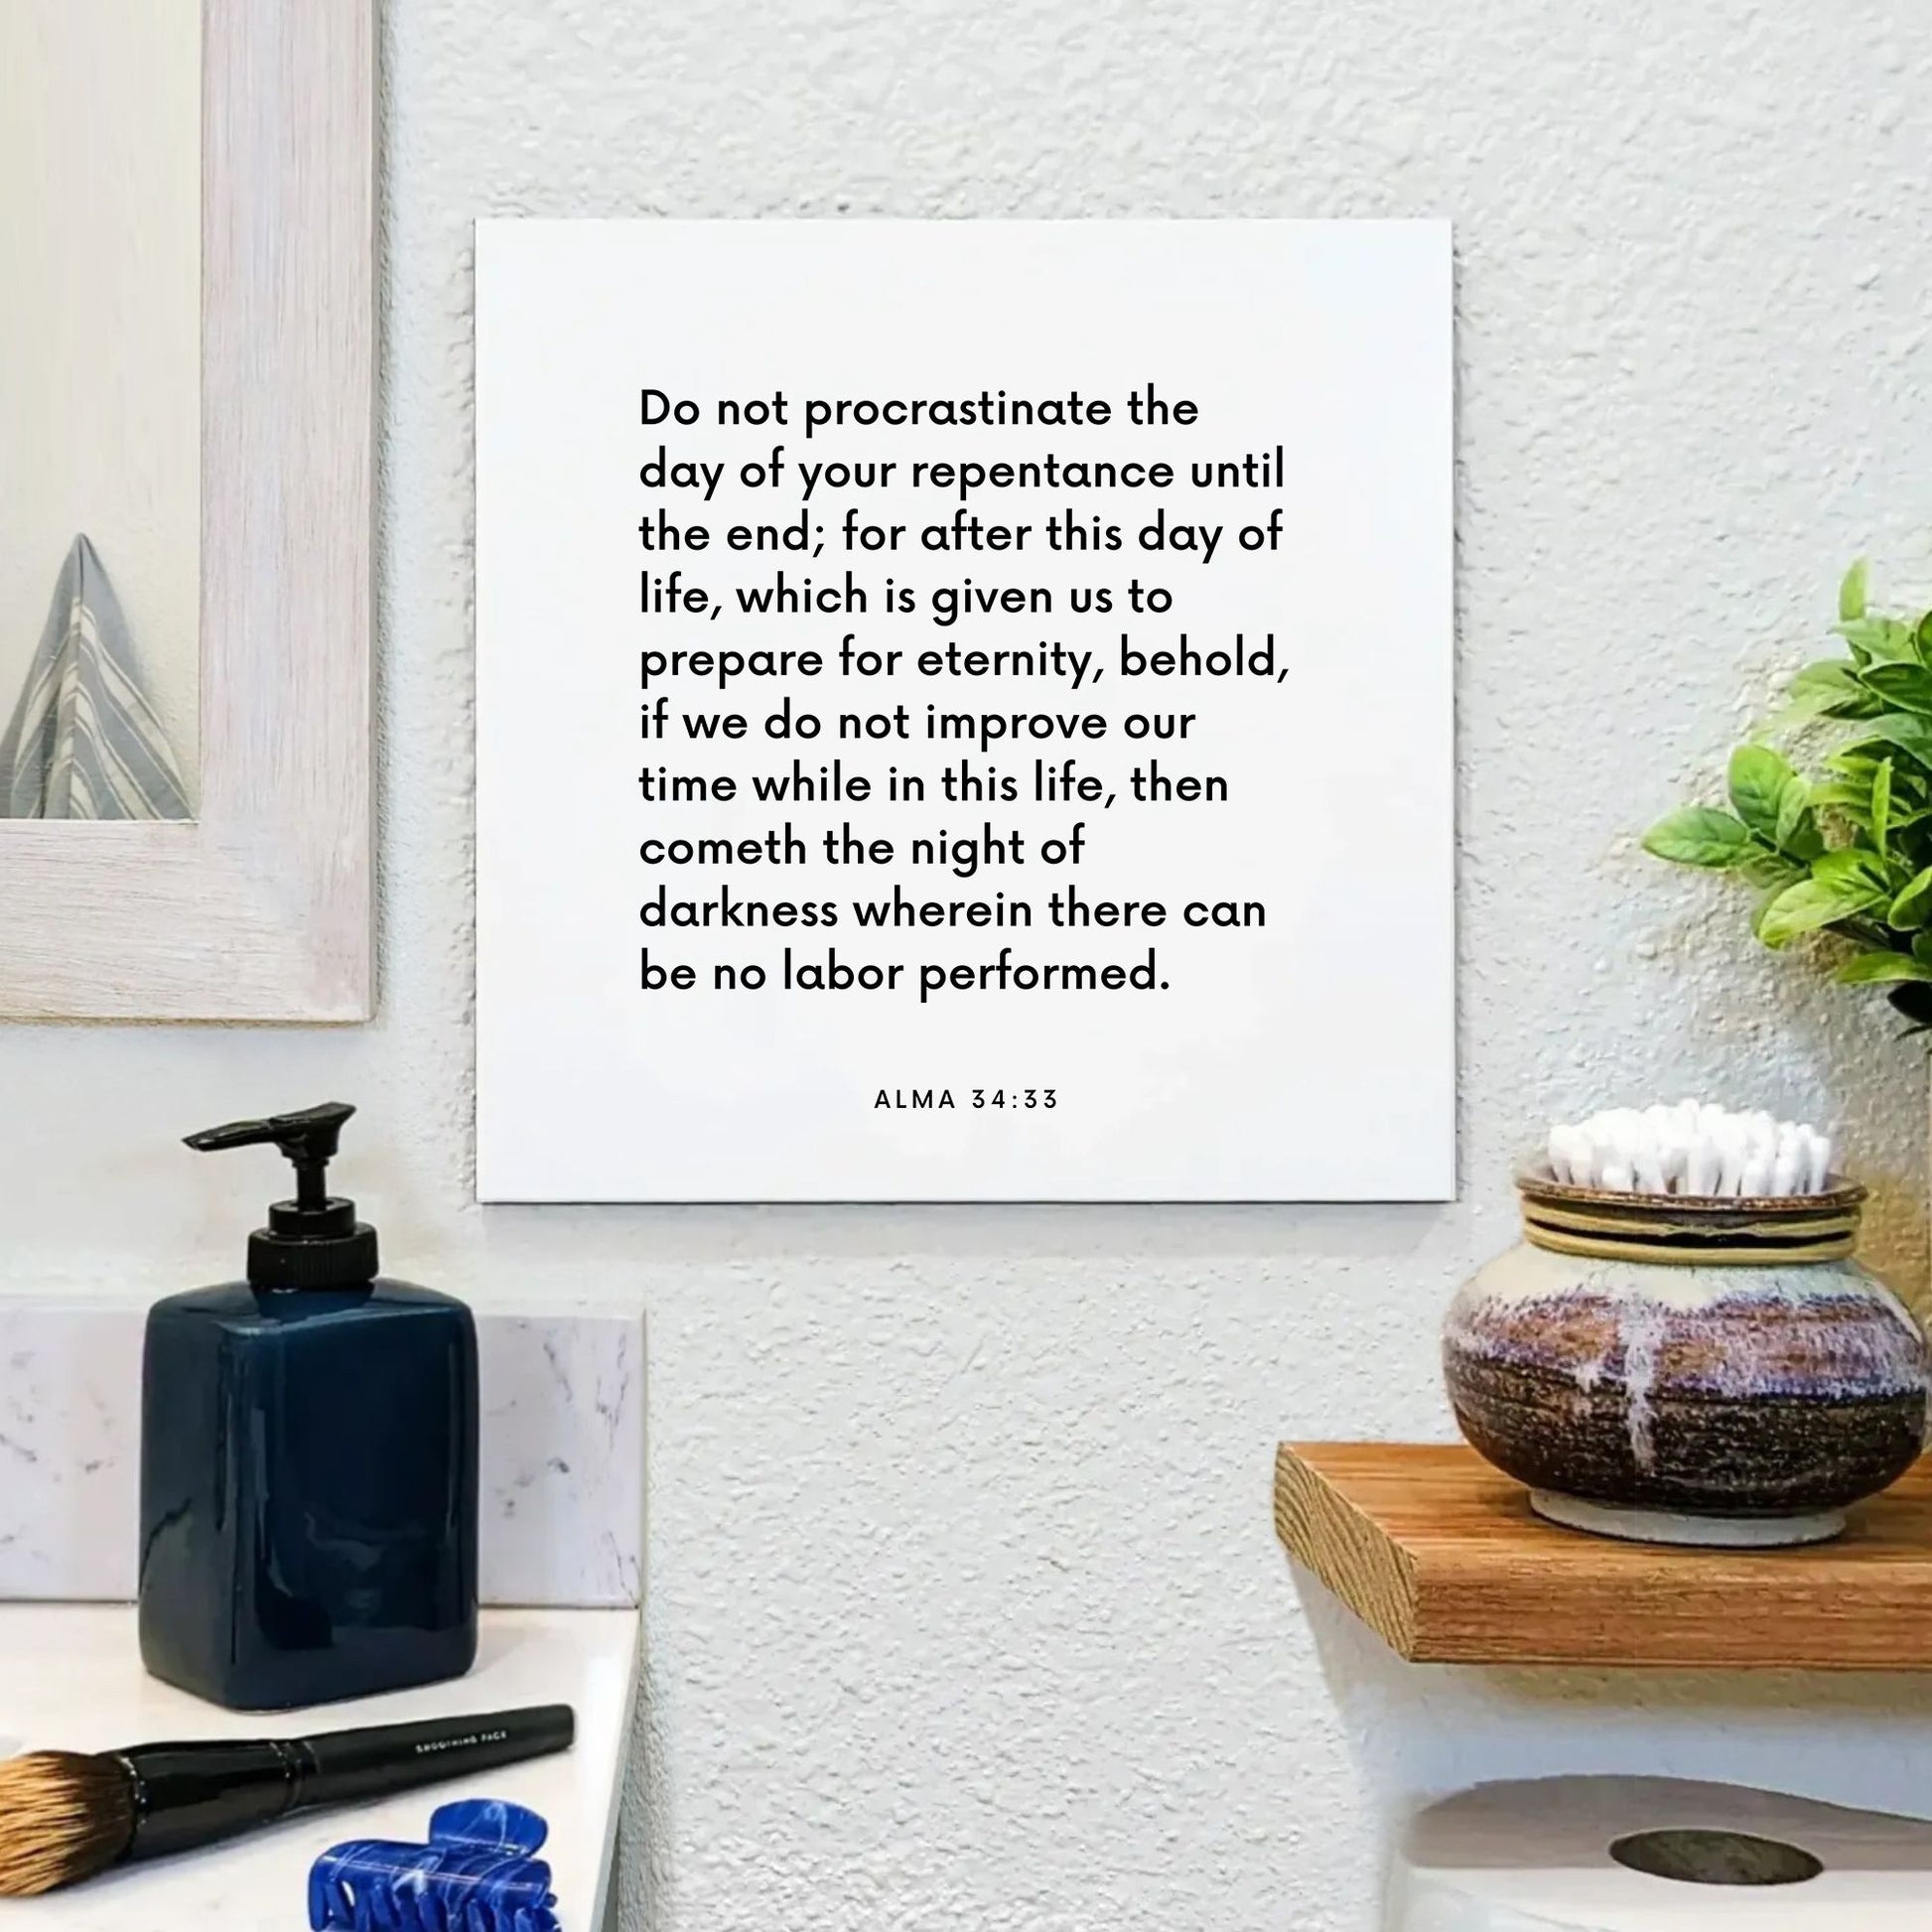 Bathroom mouting of the scripture tile for Alma 34:33 - "Do not procrastinate the day of your repentance"